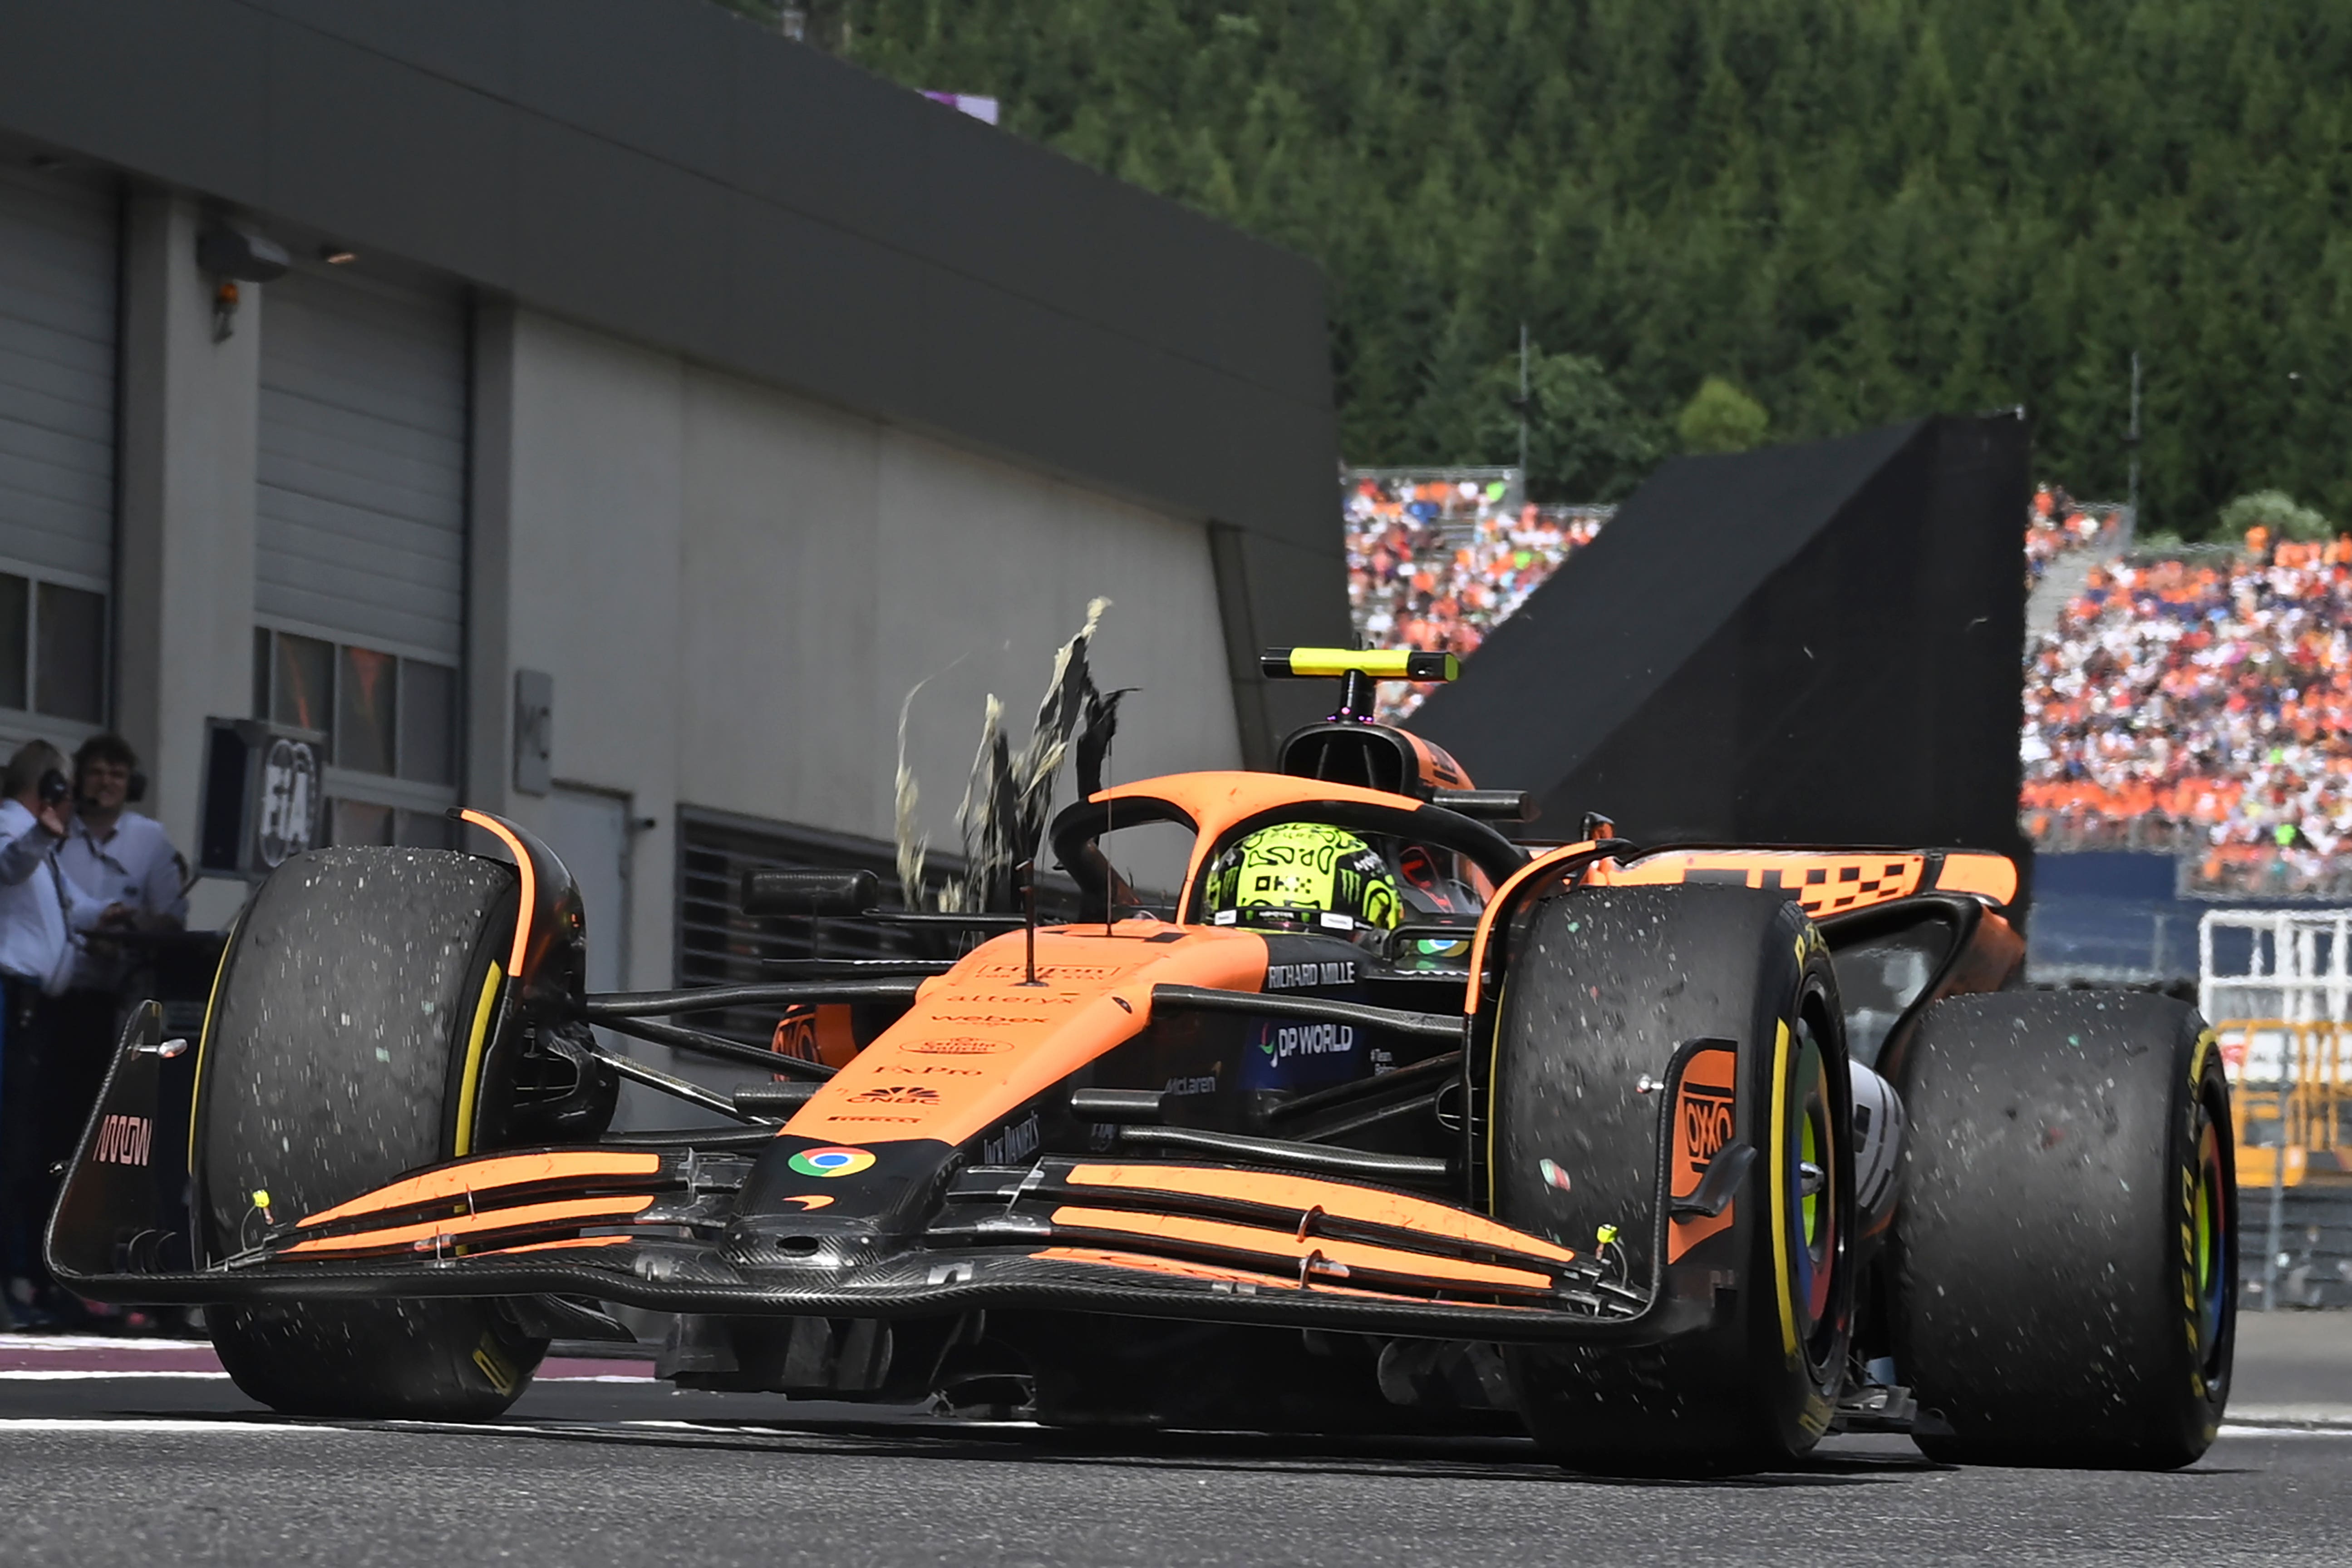 Lando Norris demanded an apology after his collision with Max Verstappen (Christian Bruna/AP)